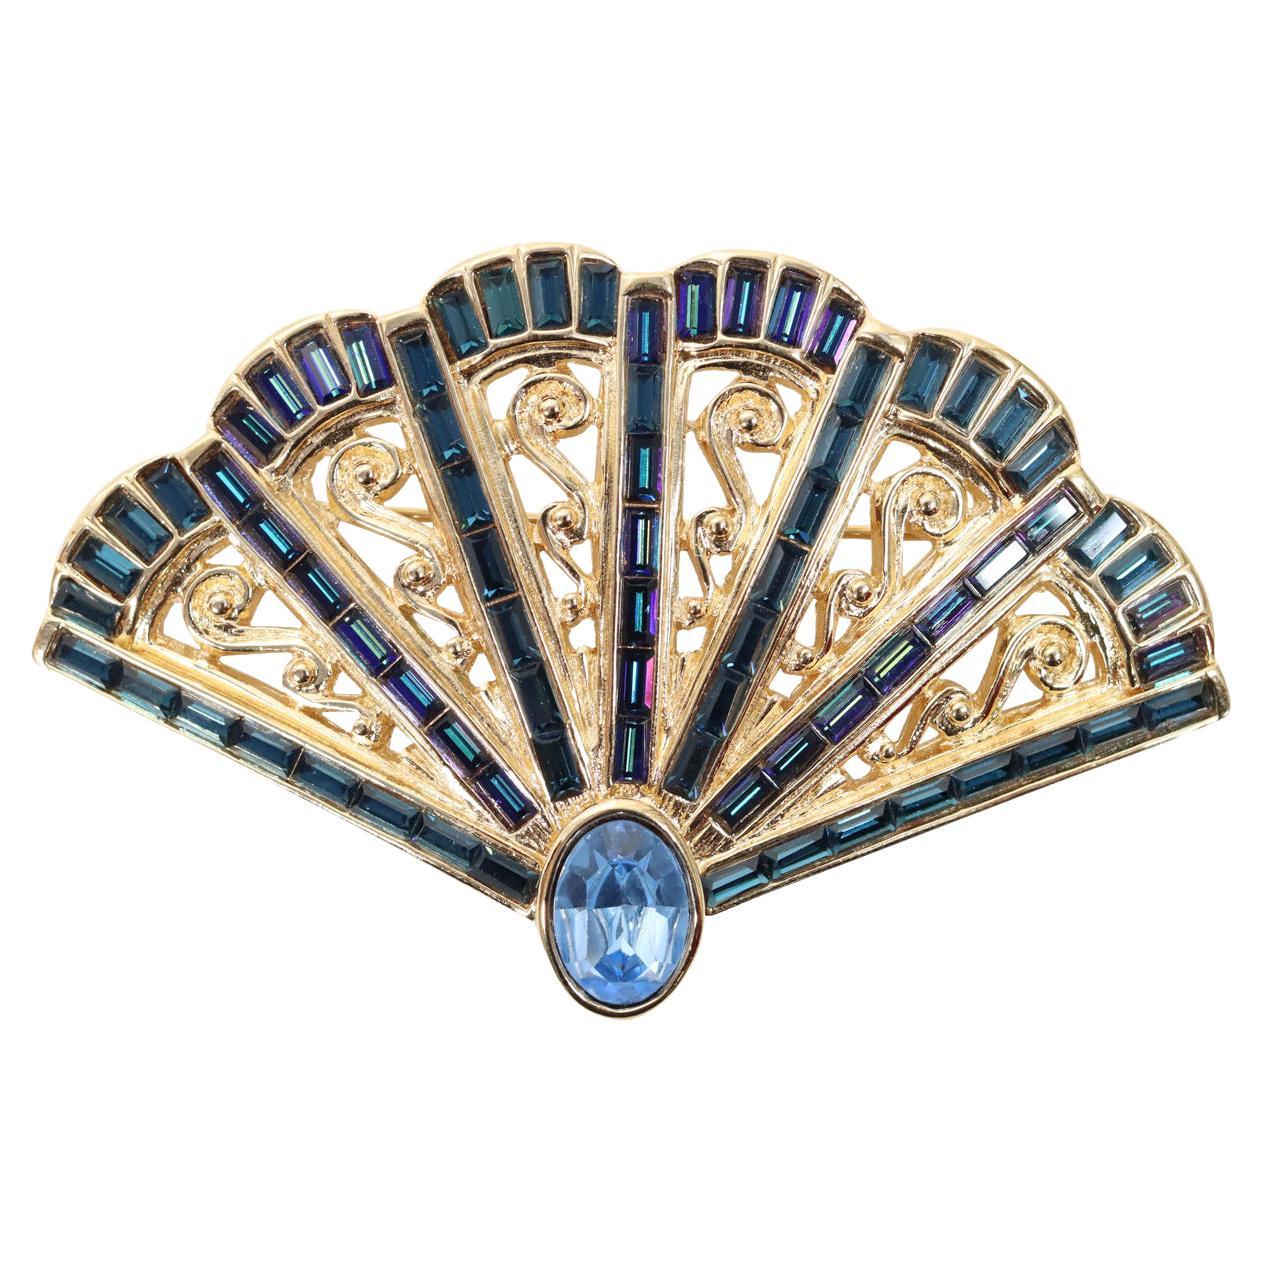 Vintage YSL Gold Tone with Blue Sapphire Crystals Fan Brooch. Spectacular. For people who like to wear brooches this is a show stopper.  There are so many ways to wear a brooch that people aren't aware of.  My most favorite is to wear it on the back